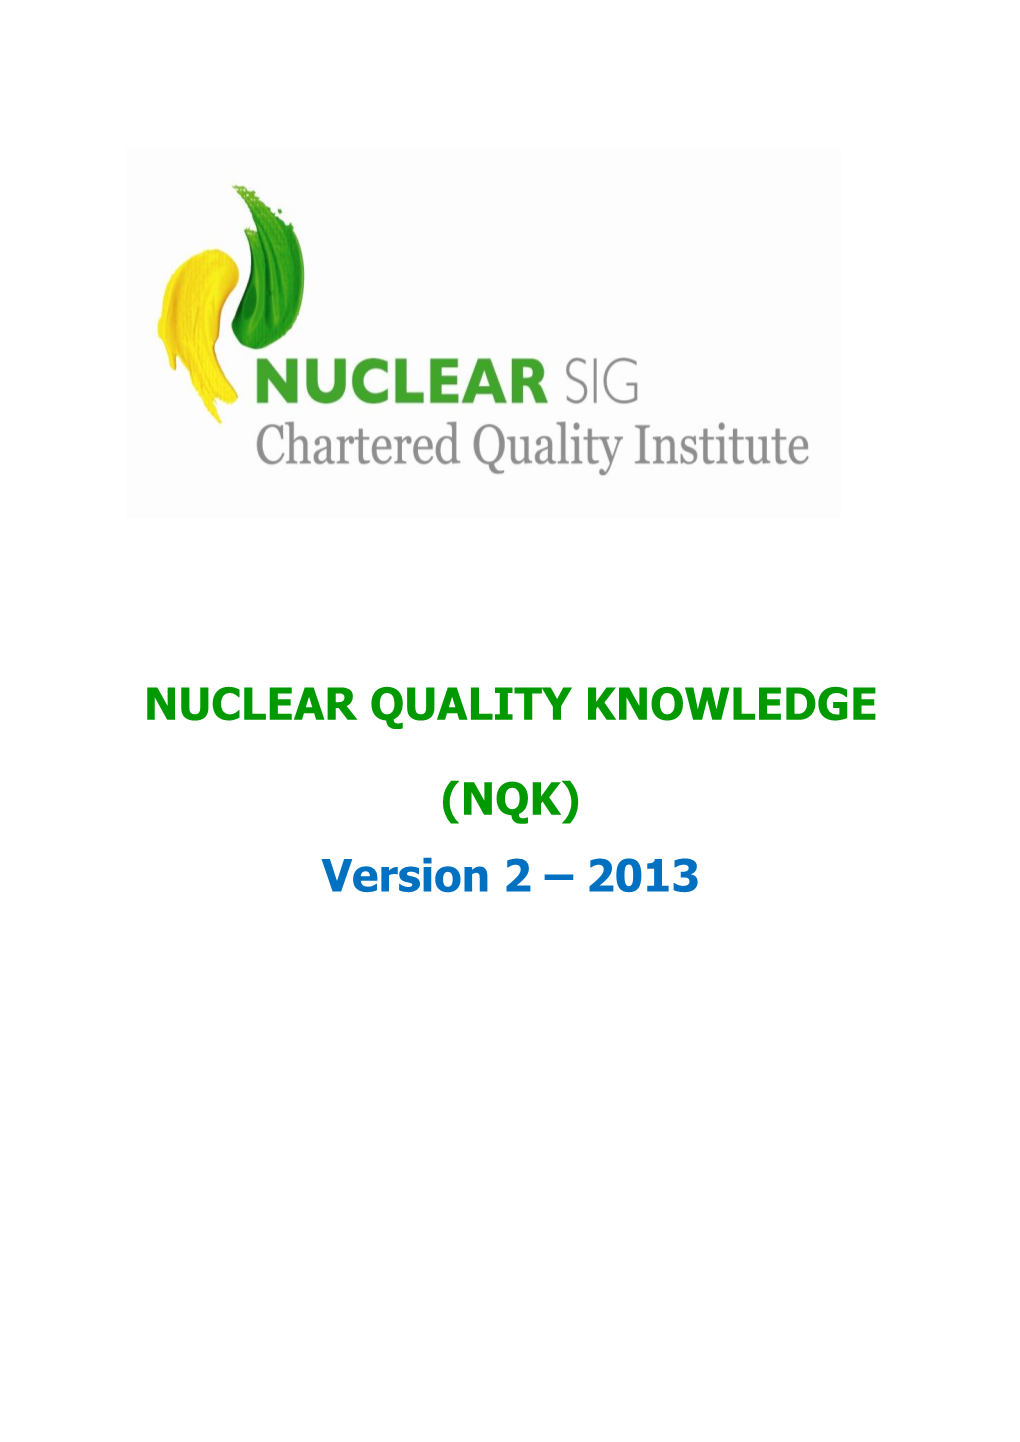 NUCLEAR QUALITY KNOWLEDGE (NQK) Version 2 – 2013